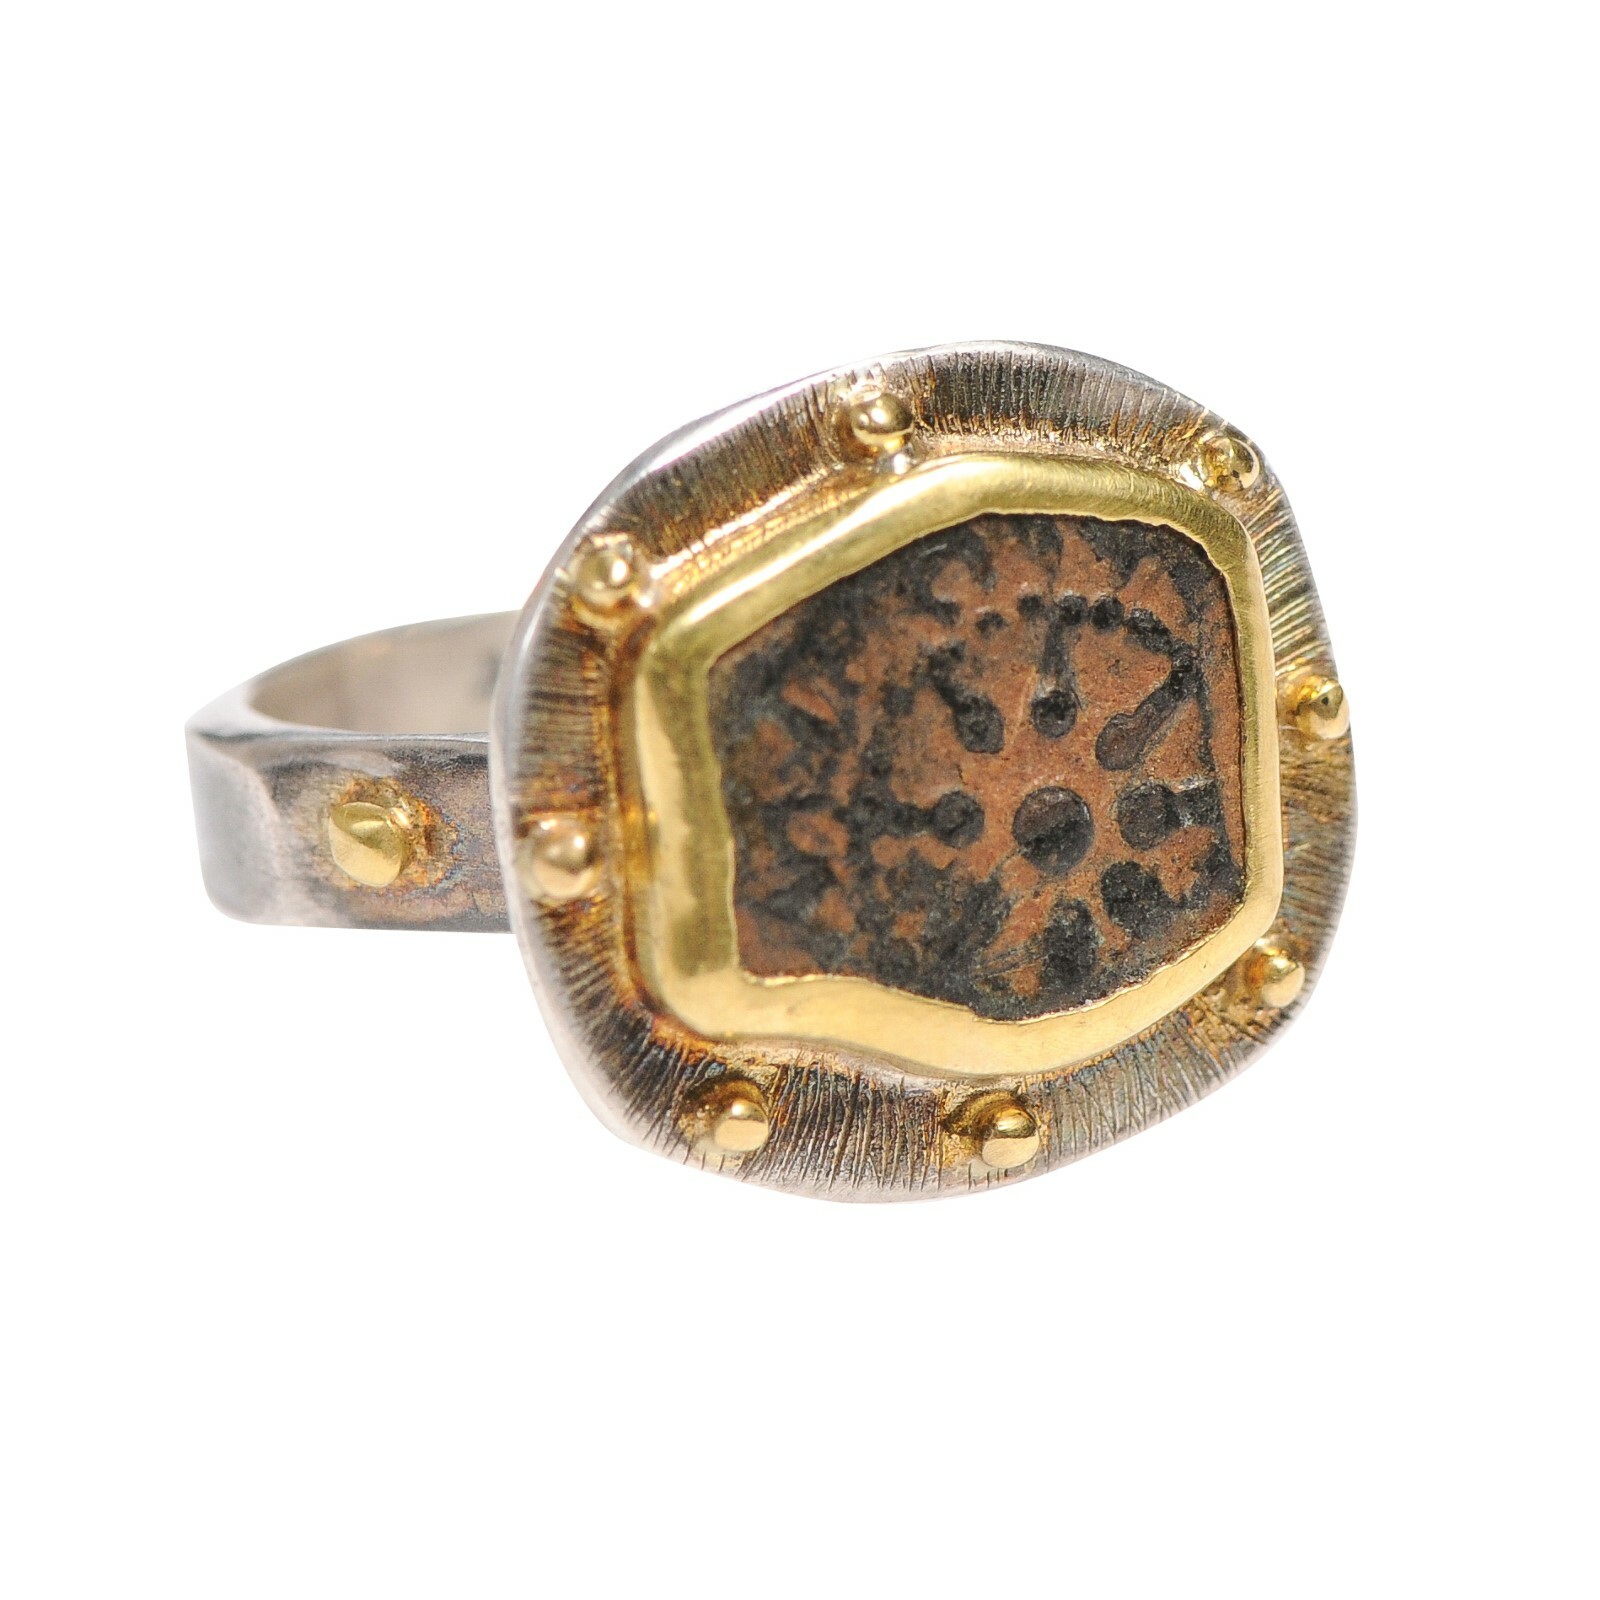 Widow's Mite Ring, 22kt Gold & Sterling